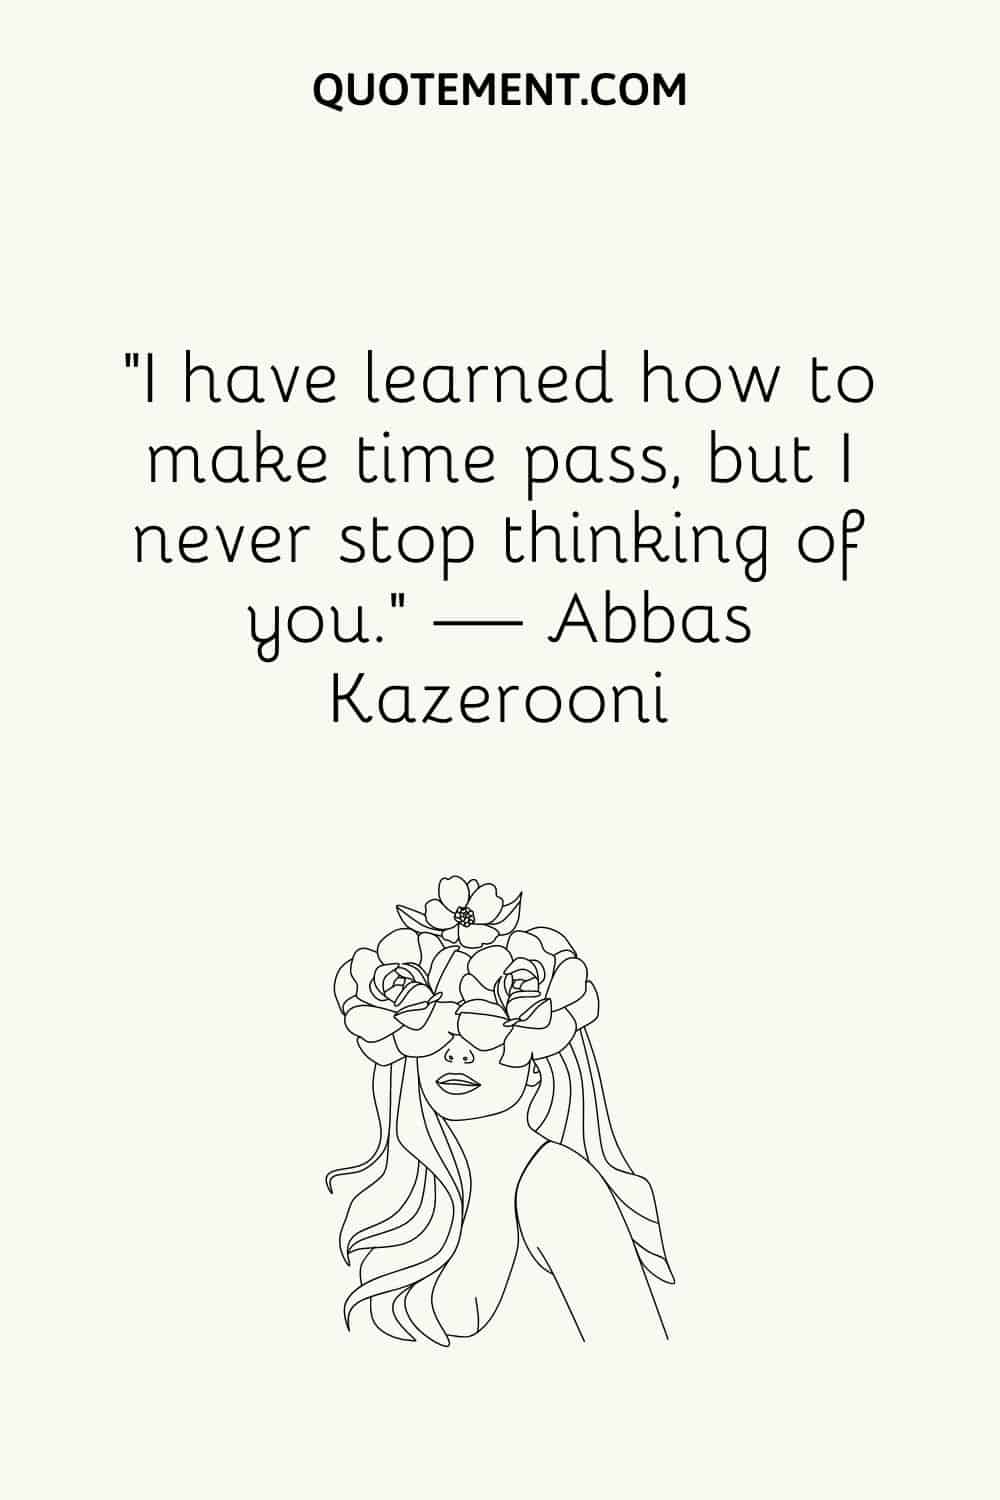 “I have learned how to make time pass, but I never stop thinking of you.” — Abbas Kazerooni